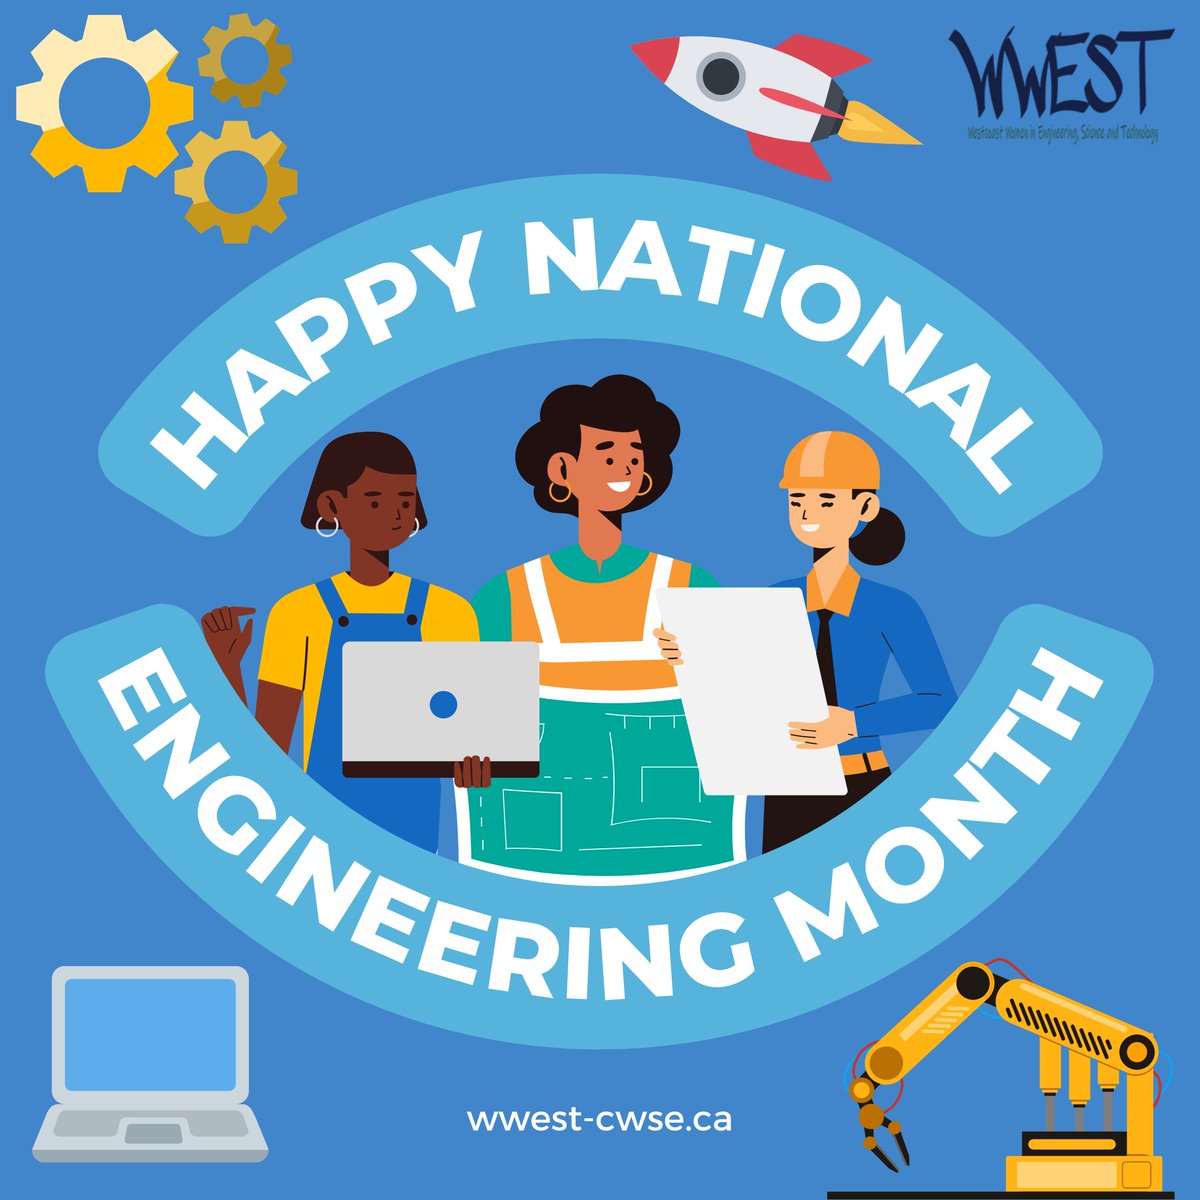 March is National Engineering Month! Be on the lookout for lots of exciting events and opportunities coming this month!

#WWESTUBCO #NationalEngineeringMonth #Engineering #WomenInEngineering #STEM #WomenInSTEM